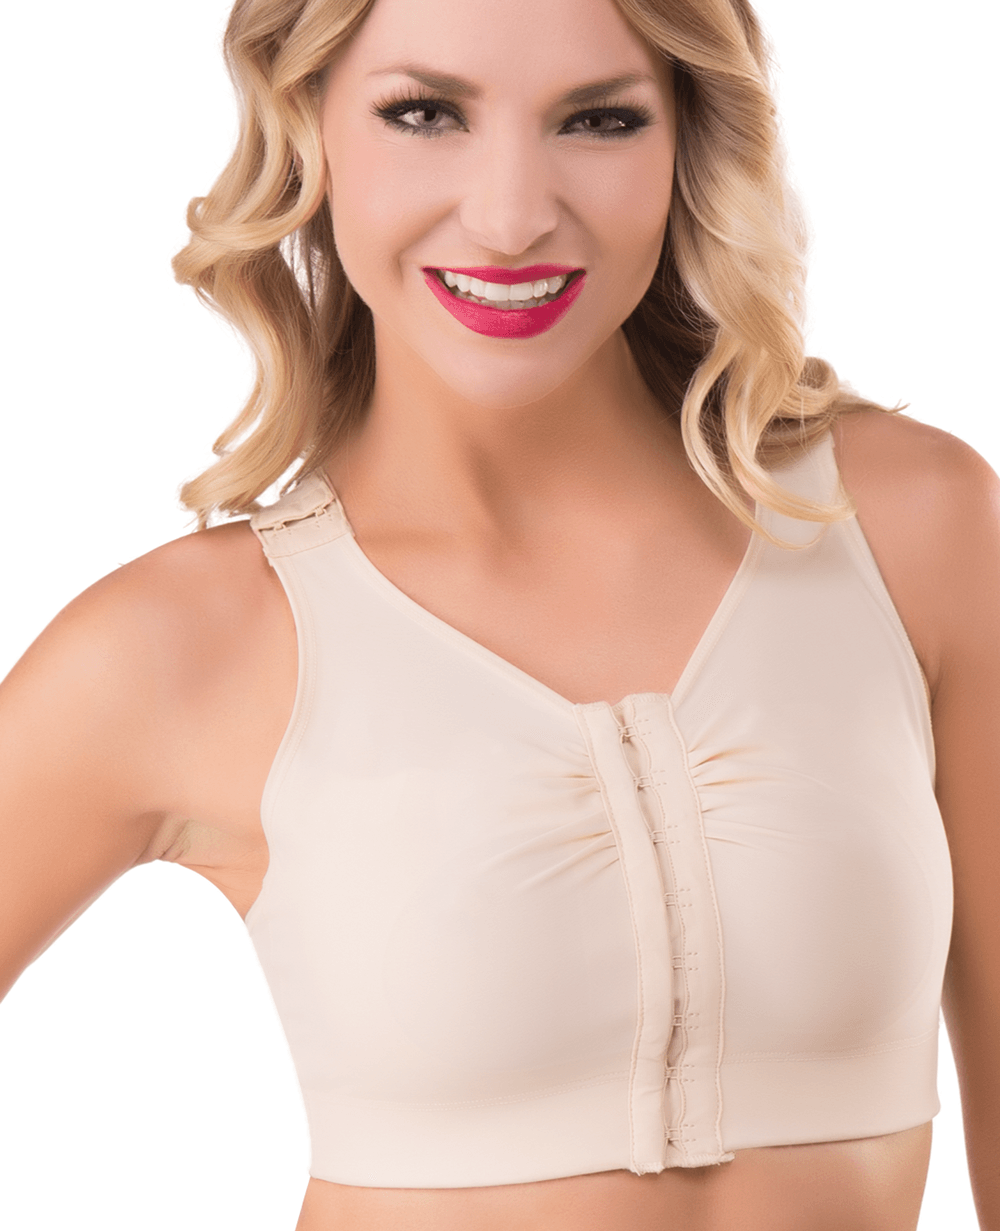 Full Support Bra with Built In Stabilizer Band (BR10) - Isavela Compression Garments